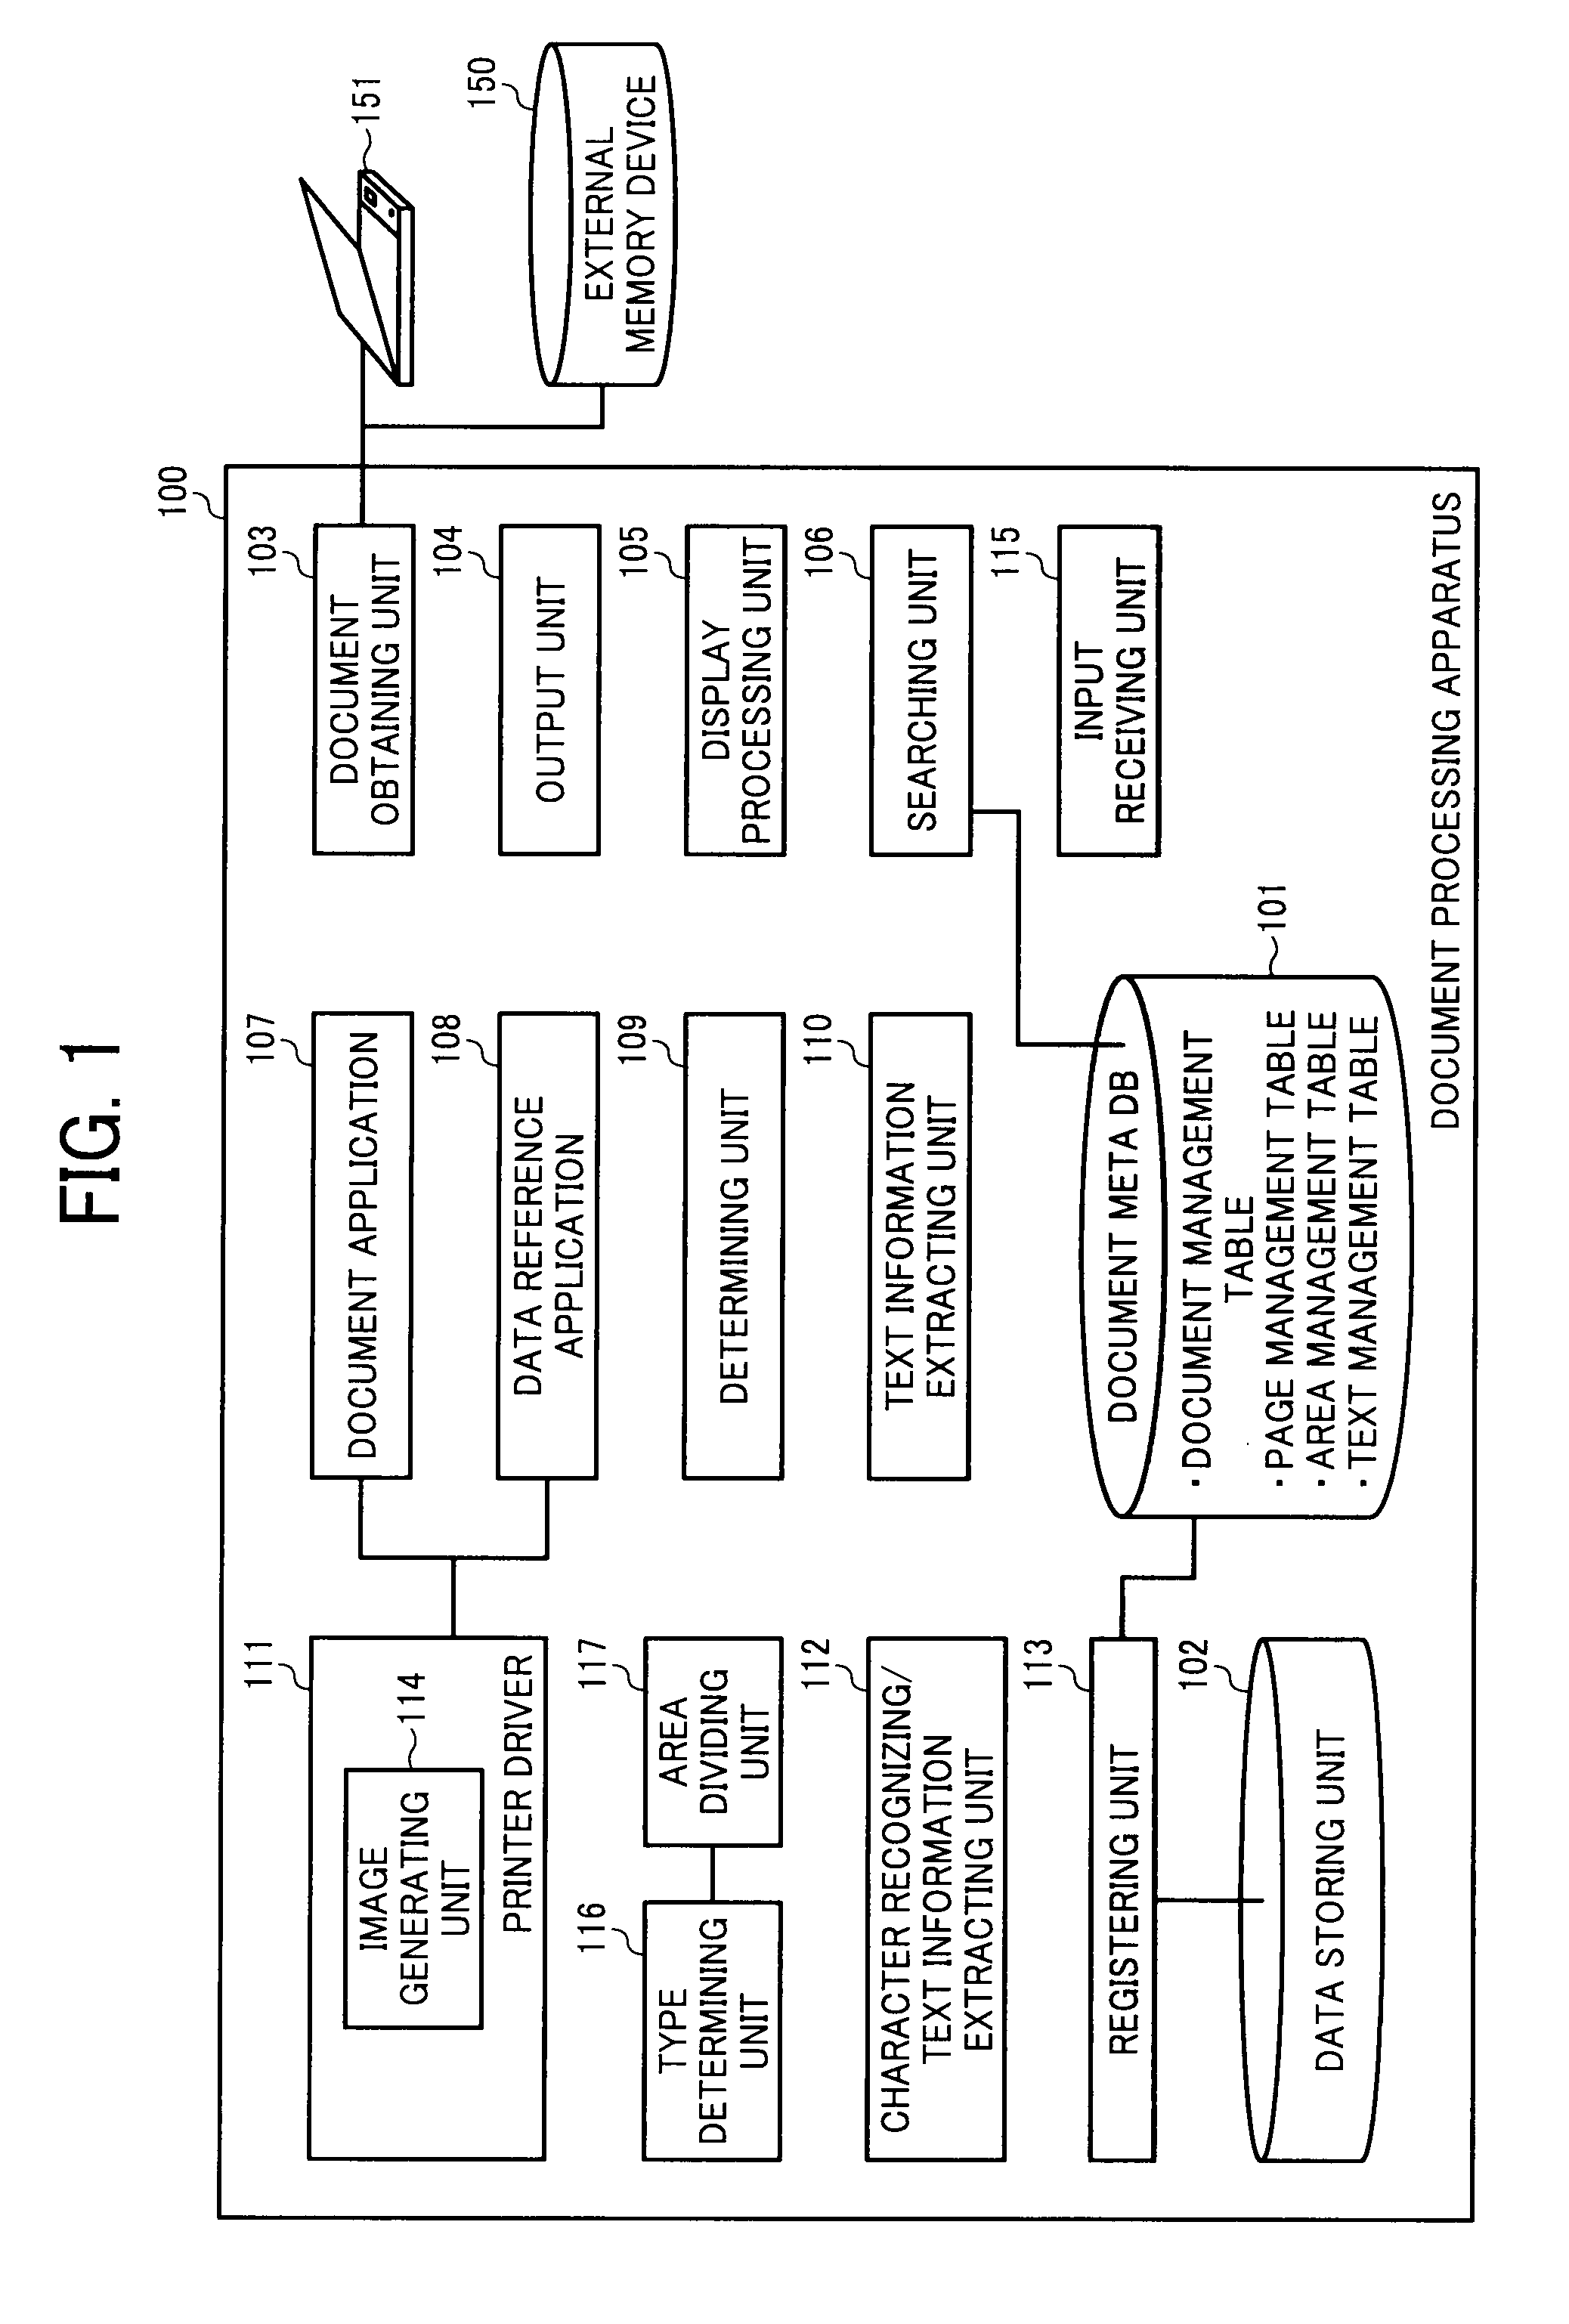 Document processing apparatus, document processing method, and computer program product